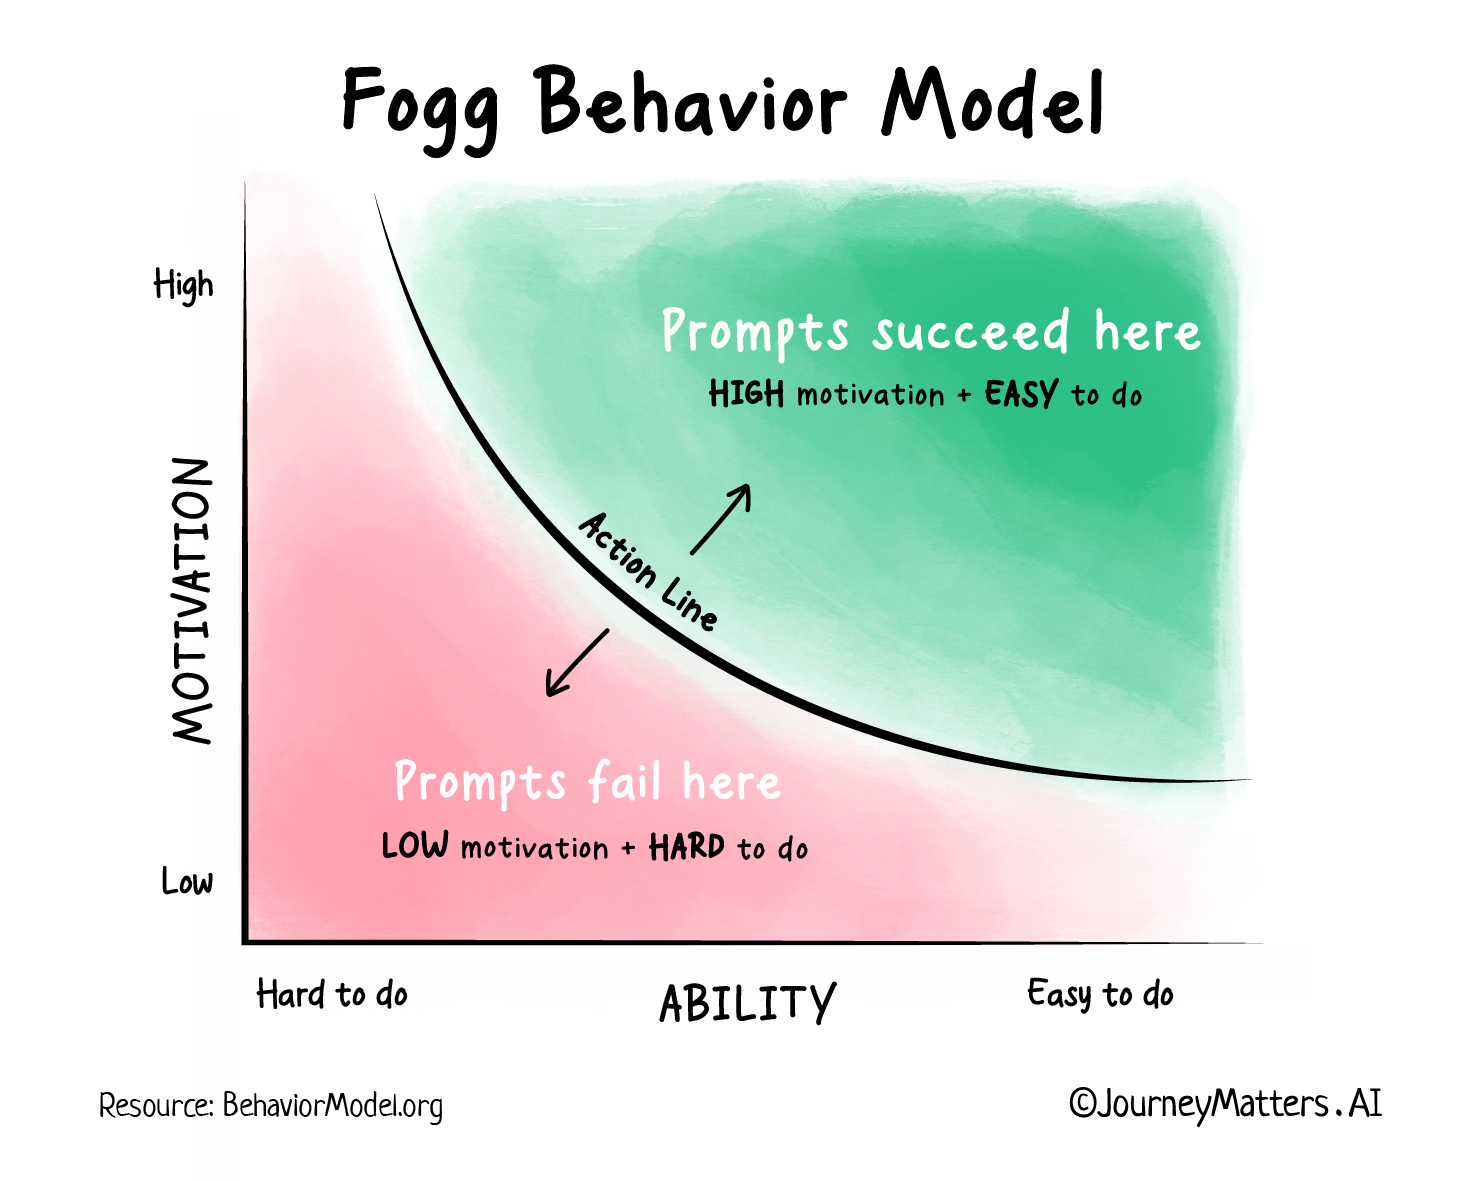 The Fogg Behavior shows behavior as a product of motivation, ability and prompt.